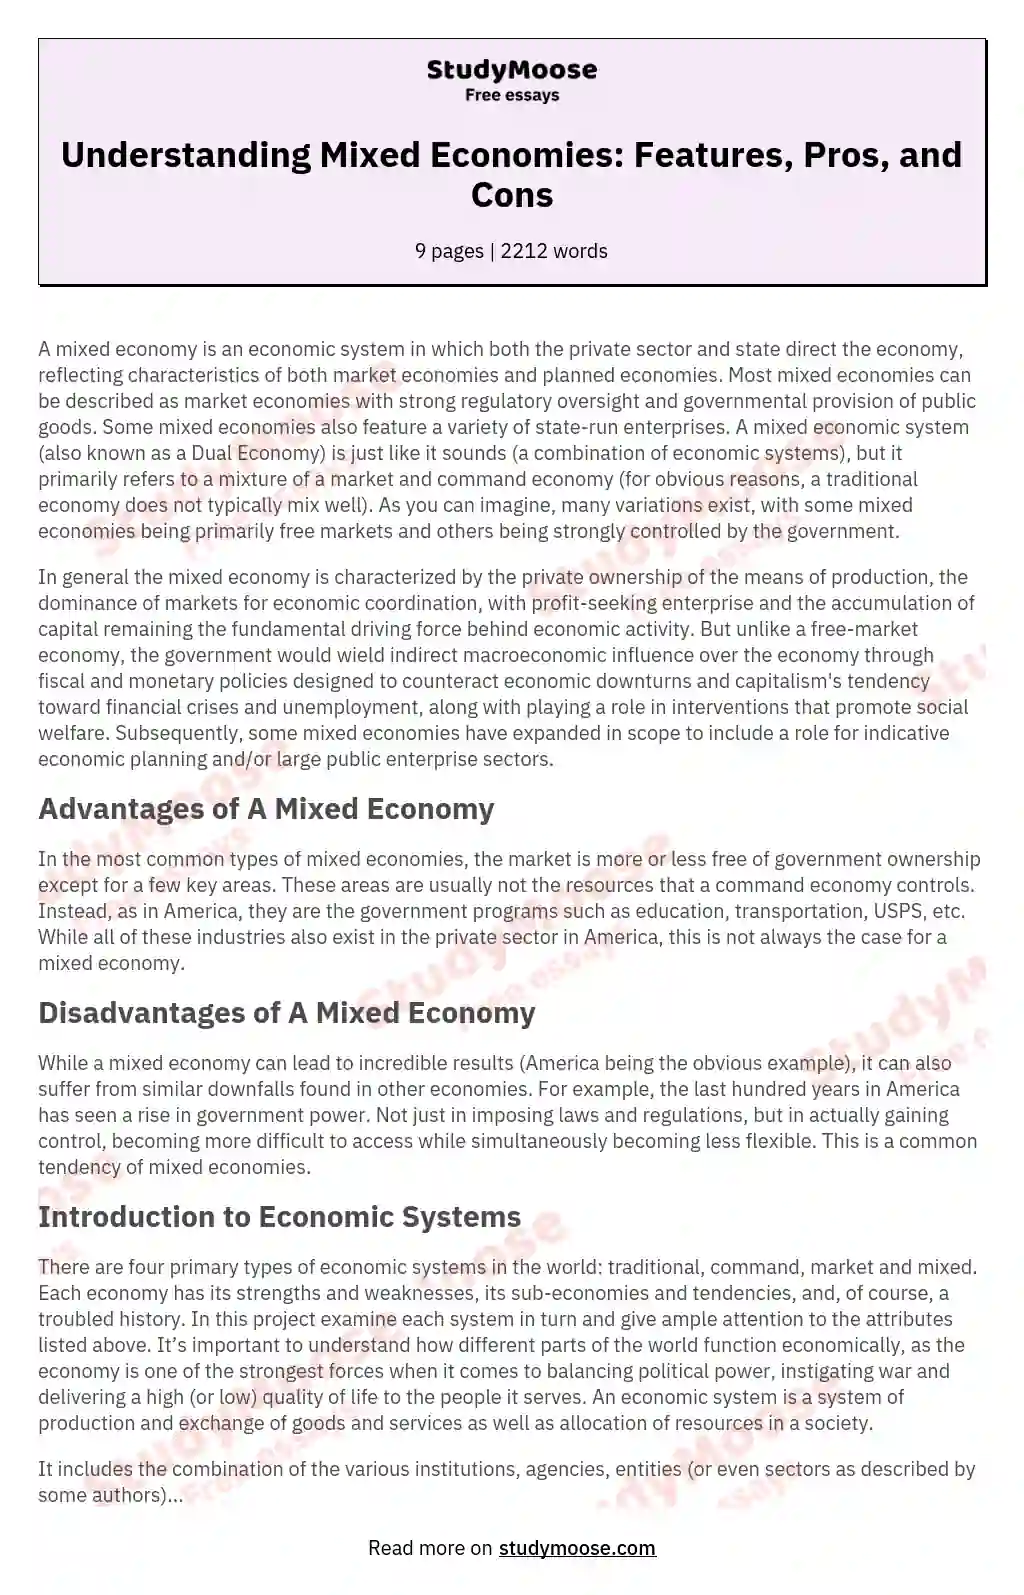 Understanding Mixed Economies: Features, Pros, and Cons essay